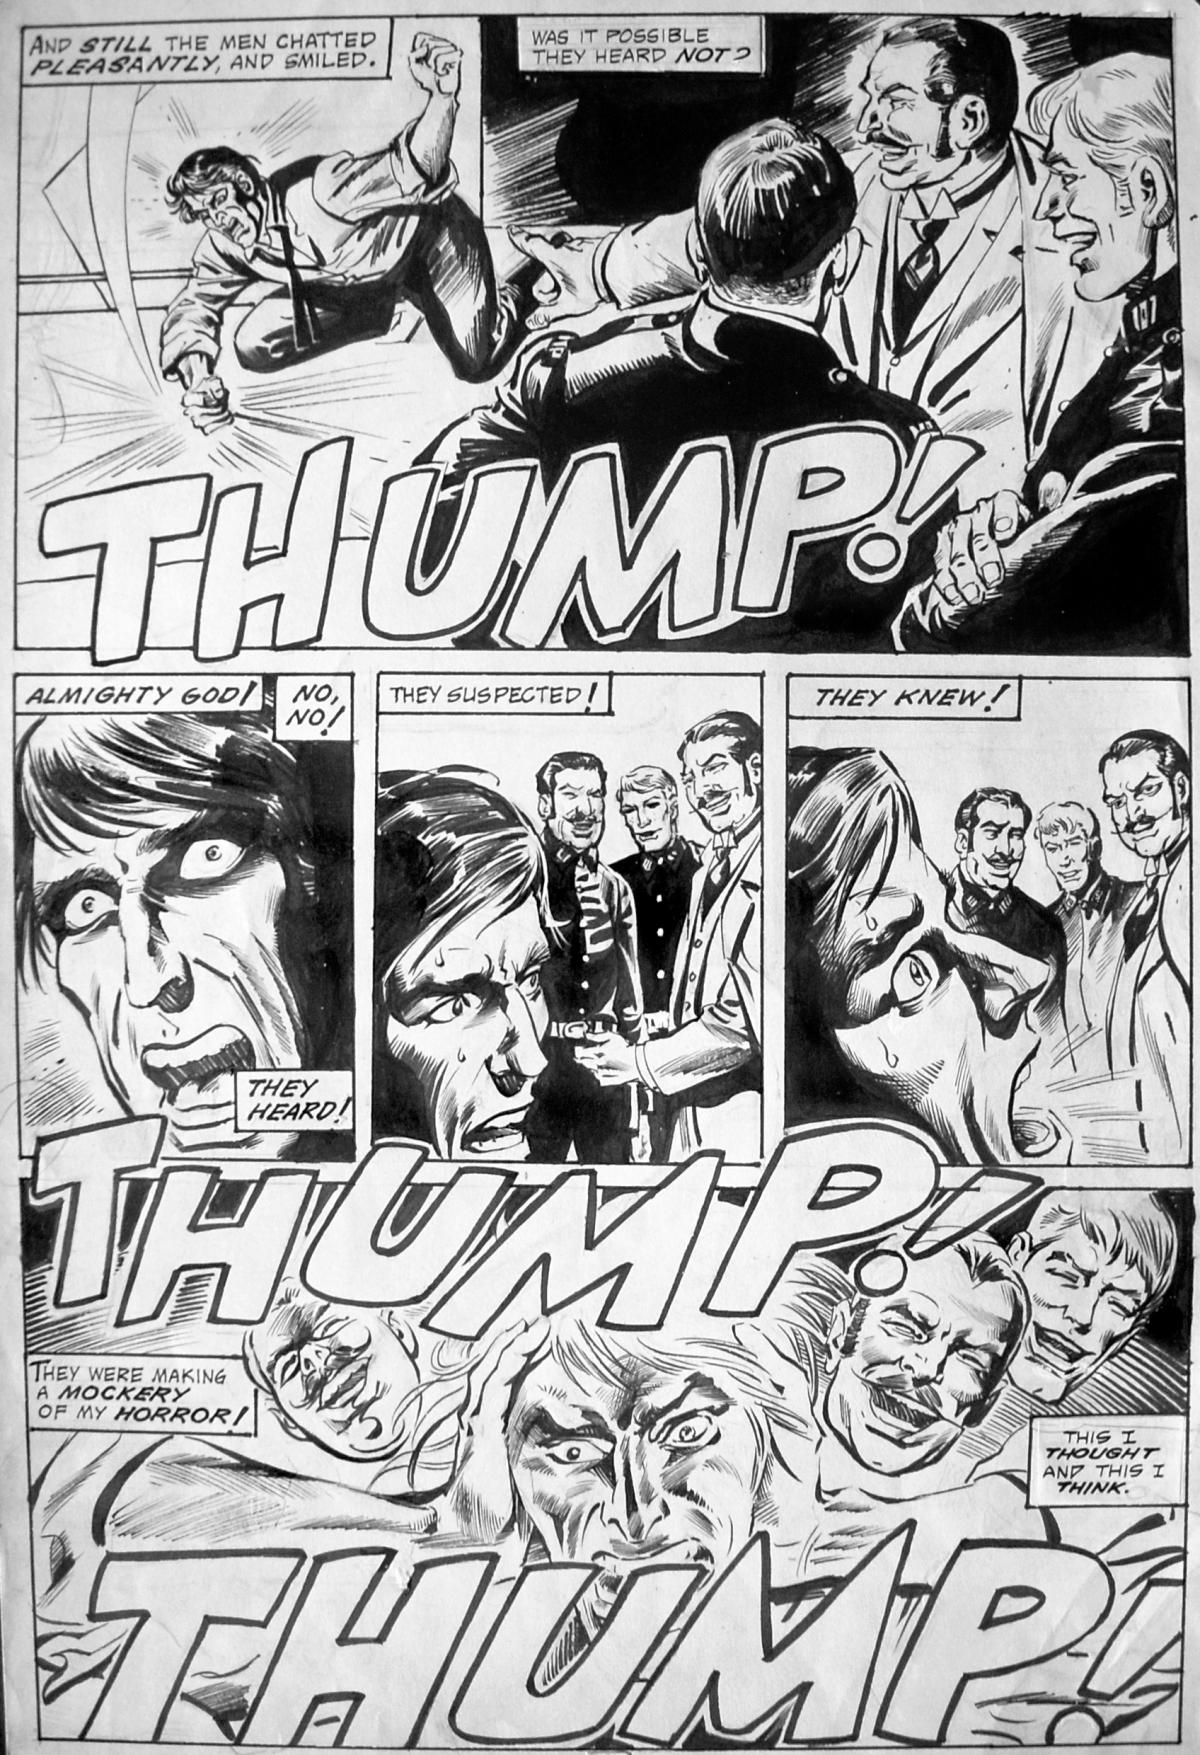 Selection of panels from comic, large text reading "thump thump thump"